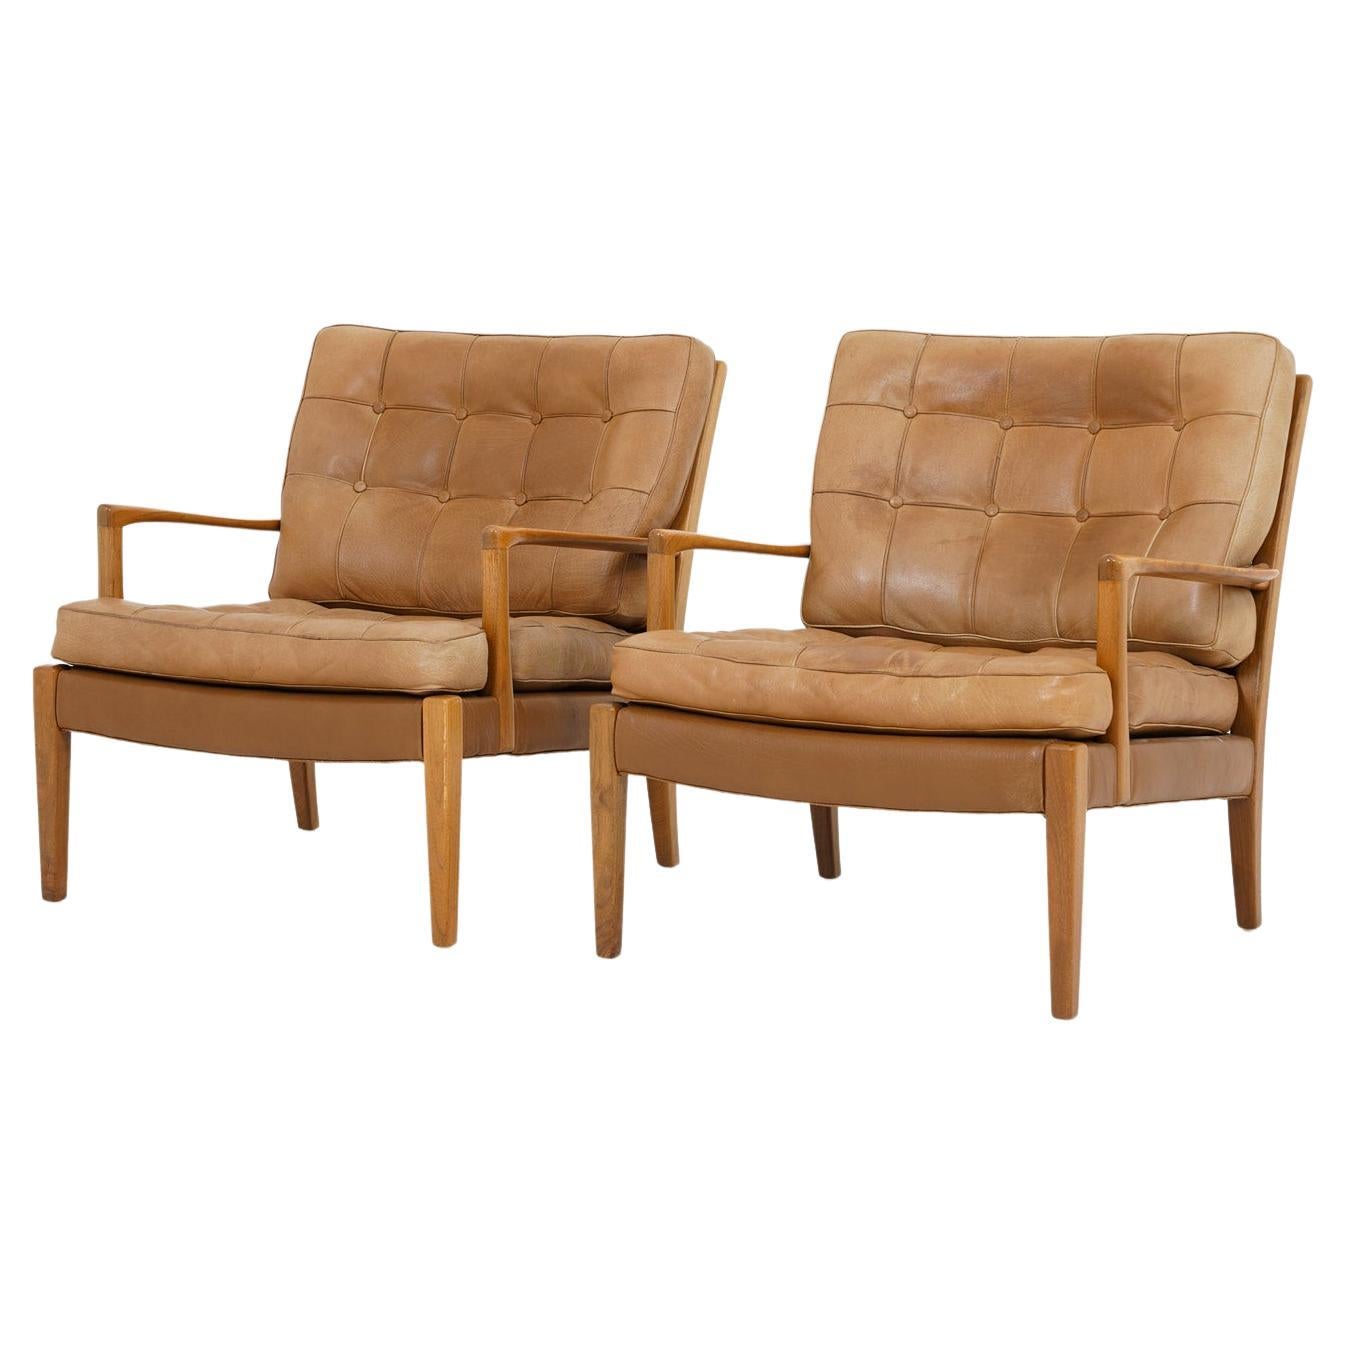 Midcentury Swedish Lounge Chairs "Löven" by Arne Norell